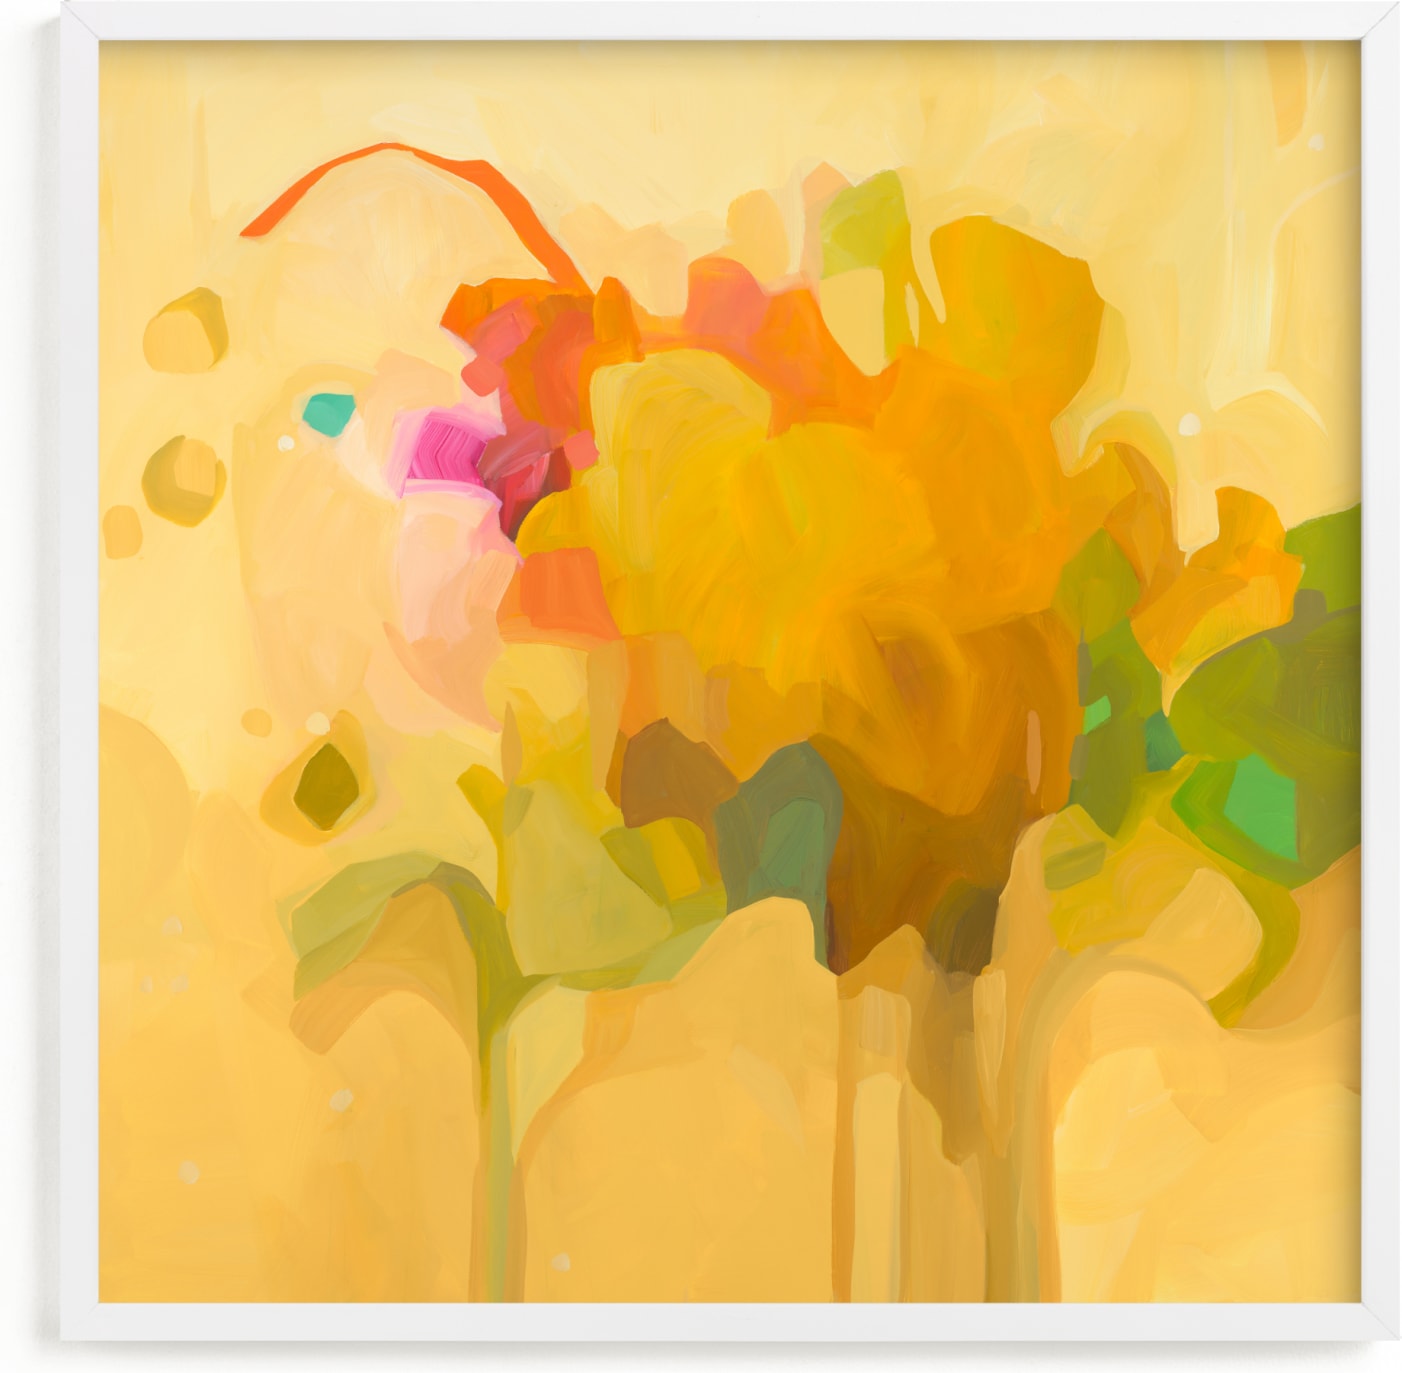 This is a yellow art by Susannah Bleasby called Sweetest Honey.